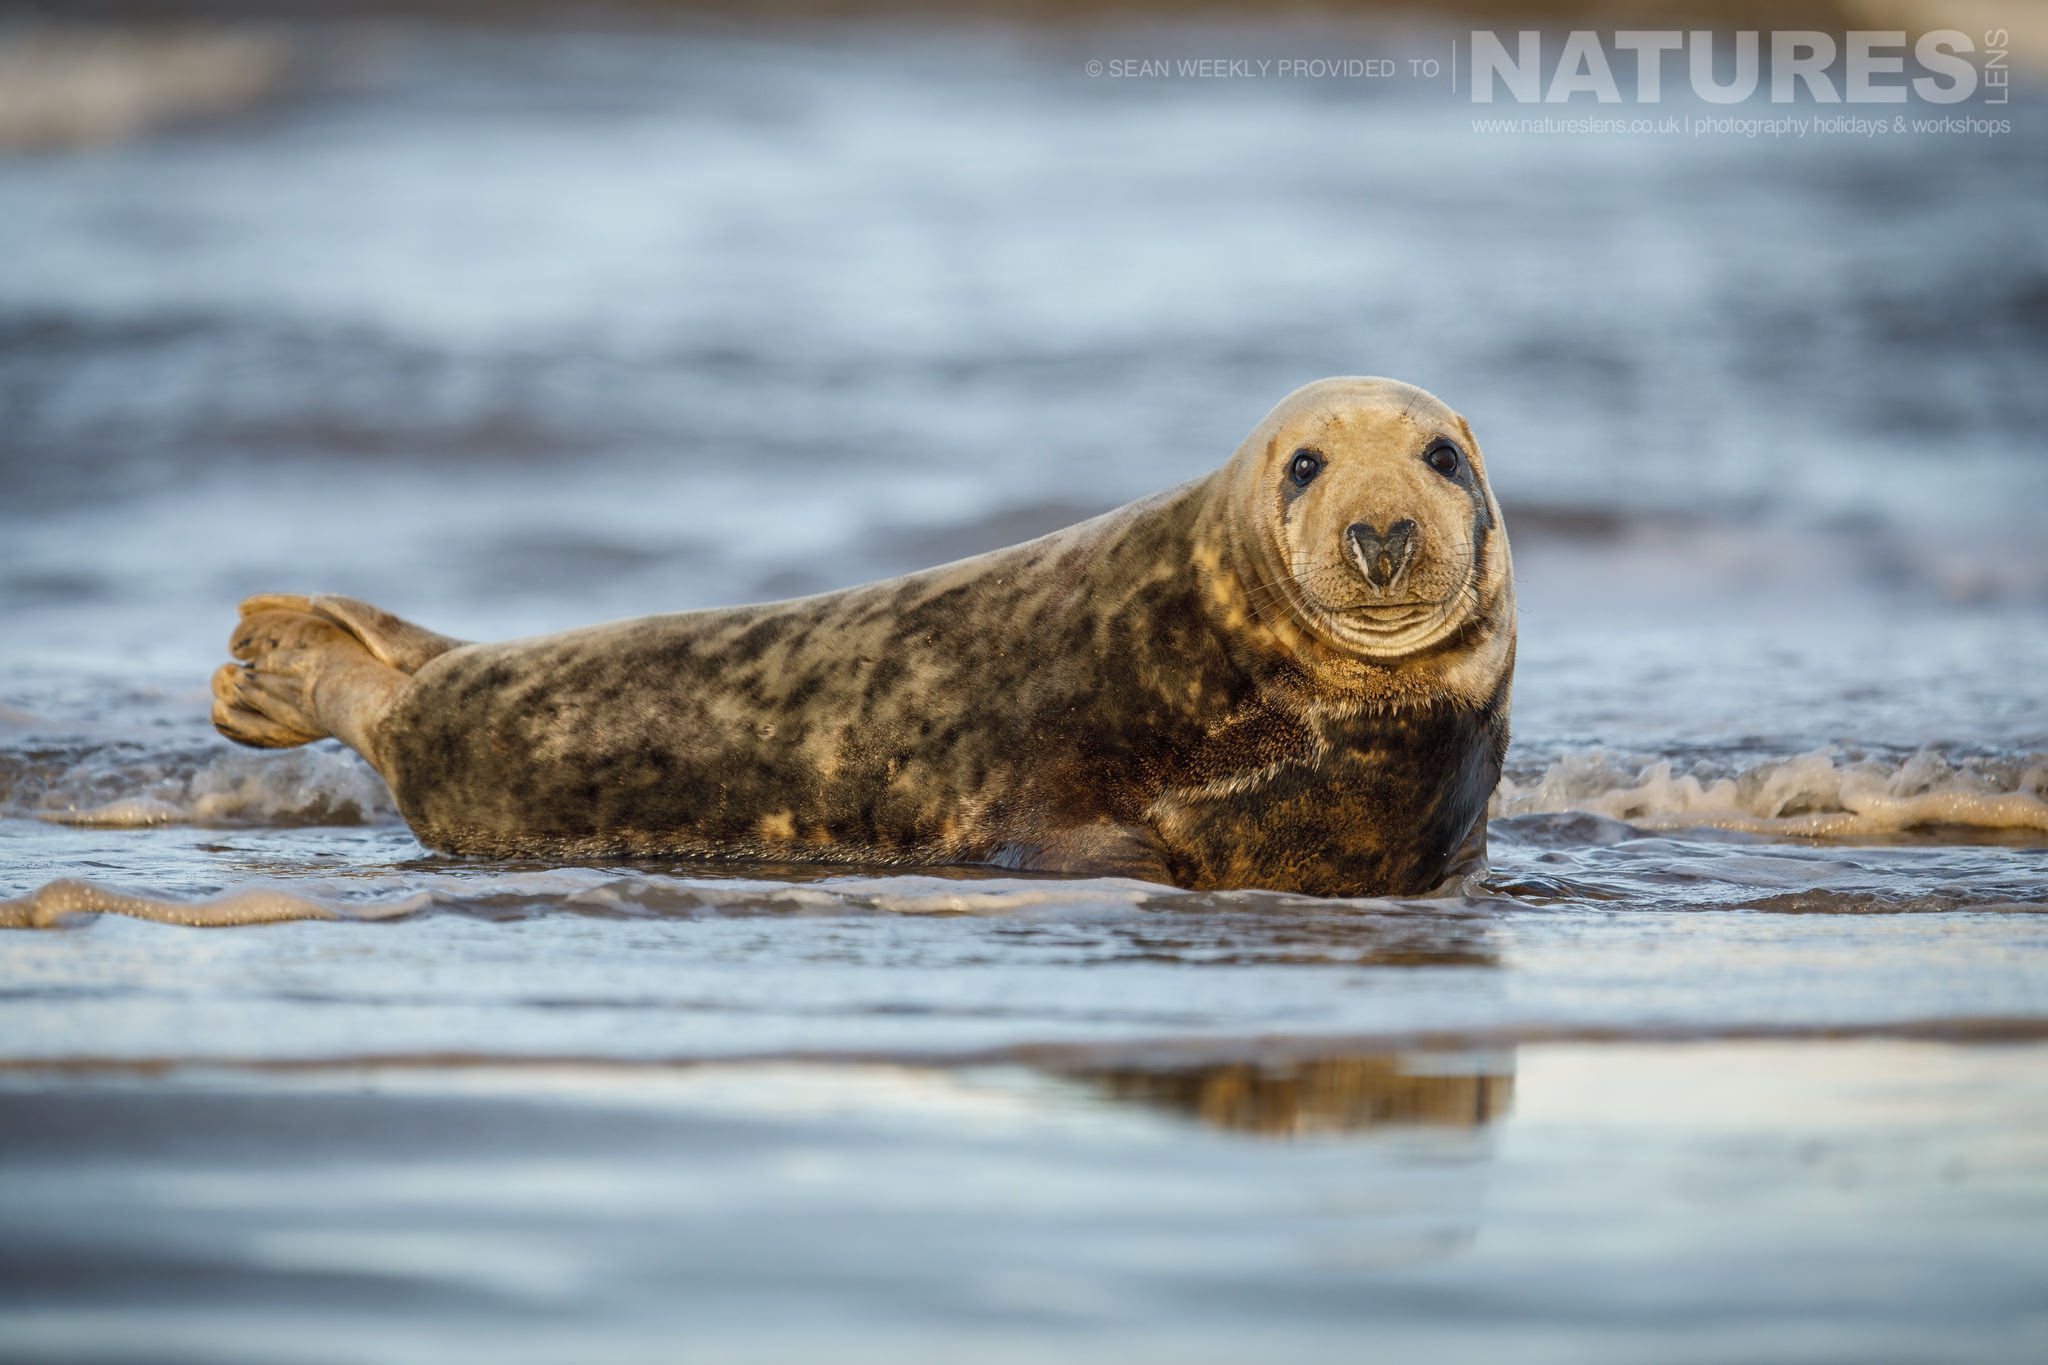 A young seal watches the photographer from the shoreline photographed on the NaturesLens Seals of Lincolnshire Photography Holiday